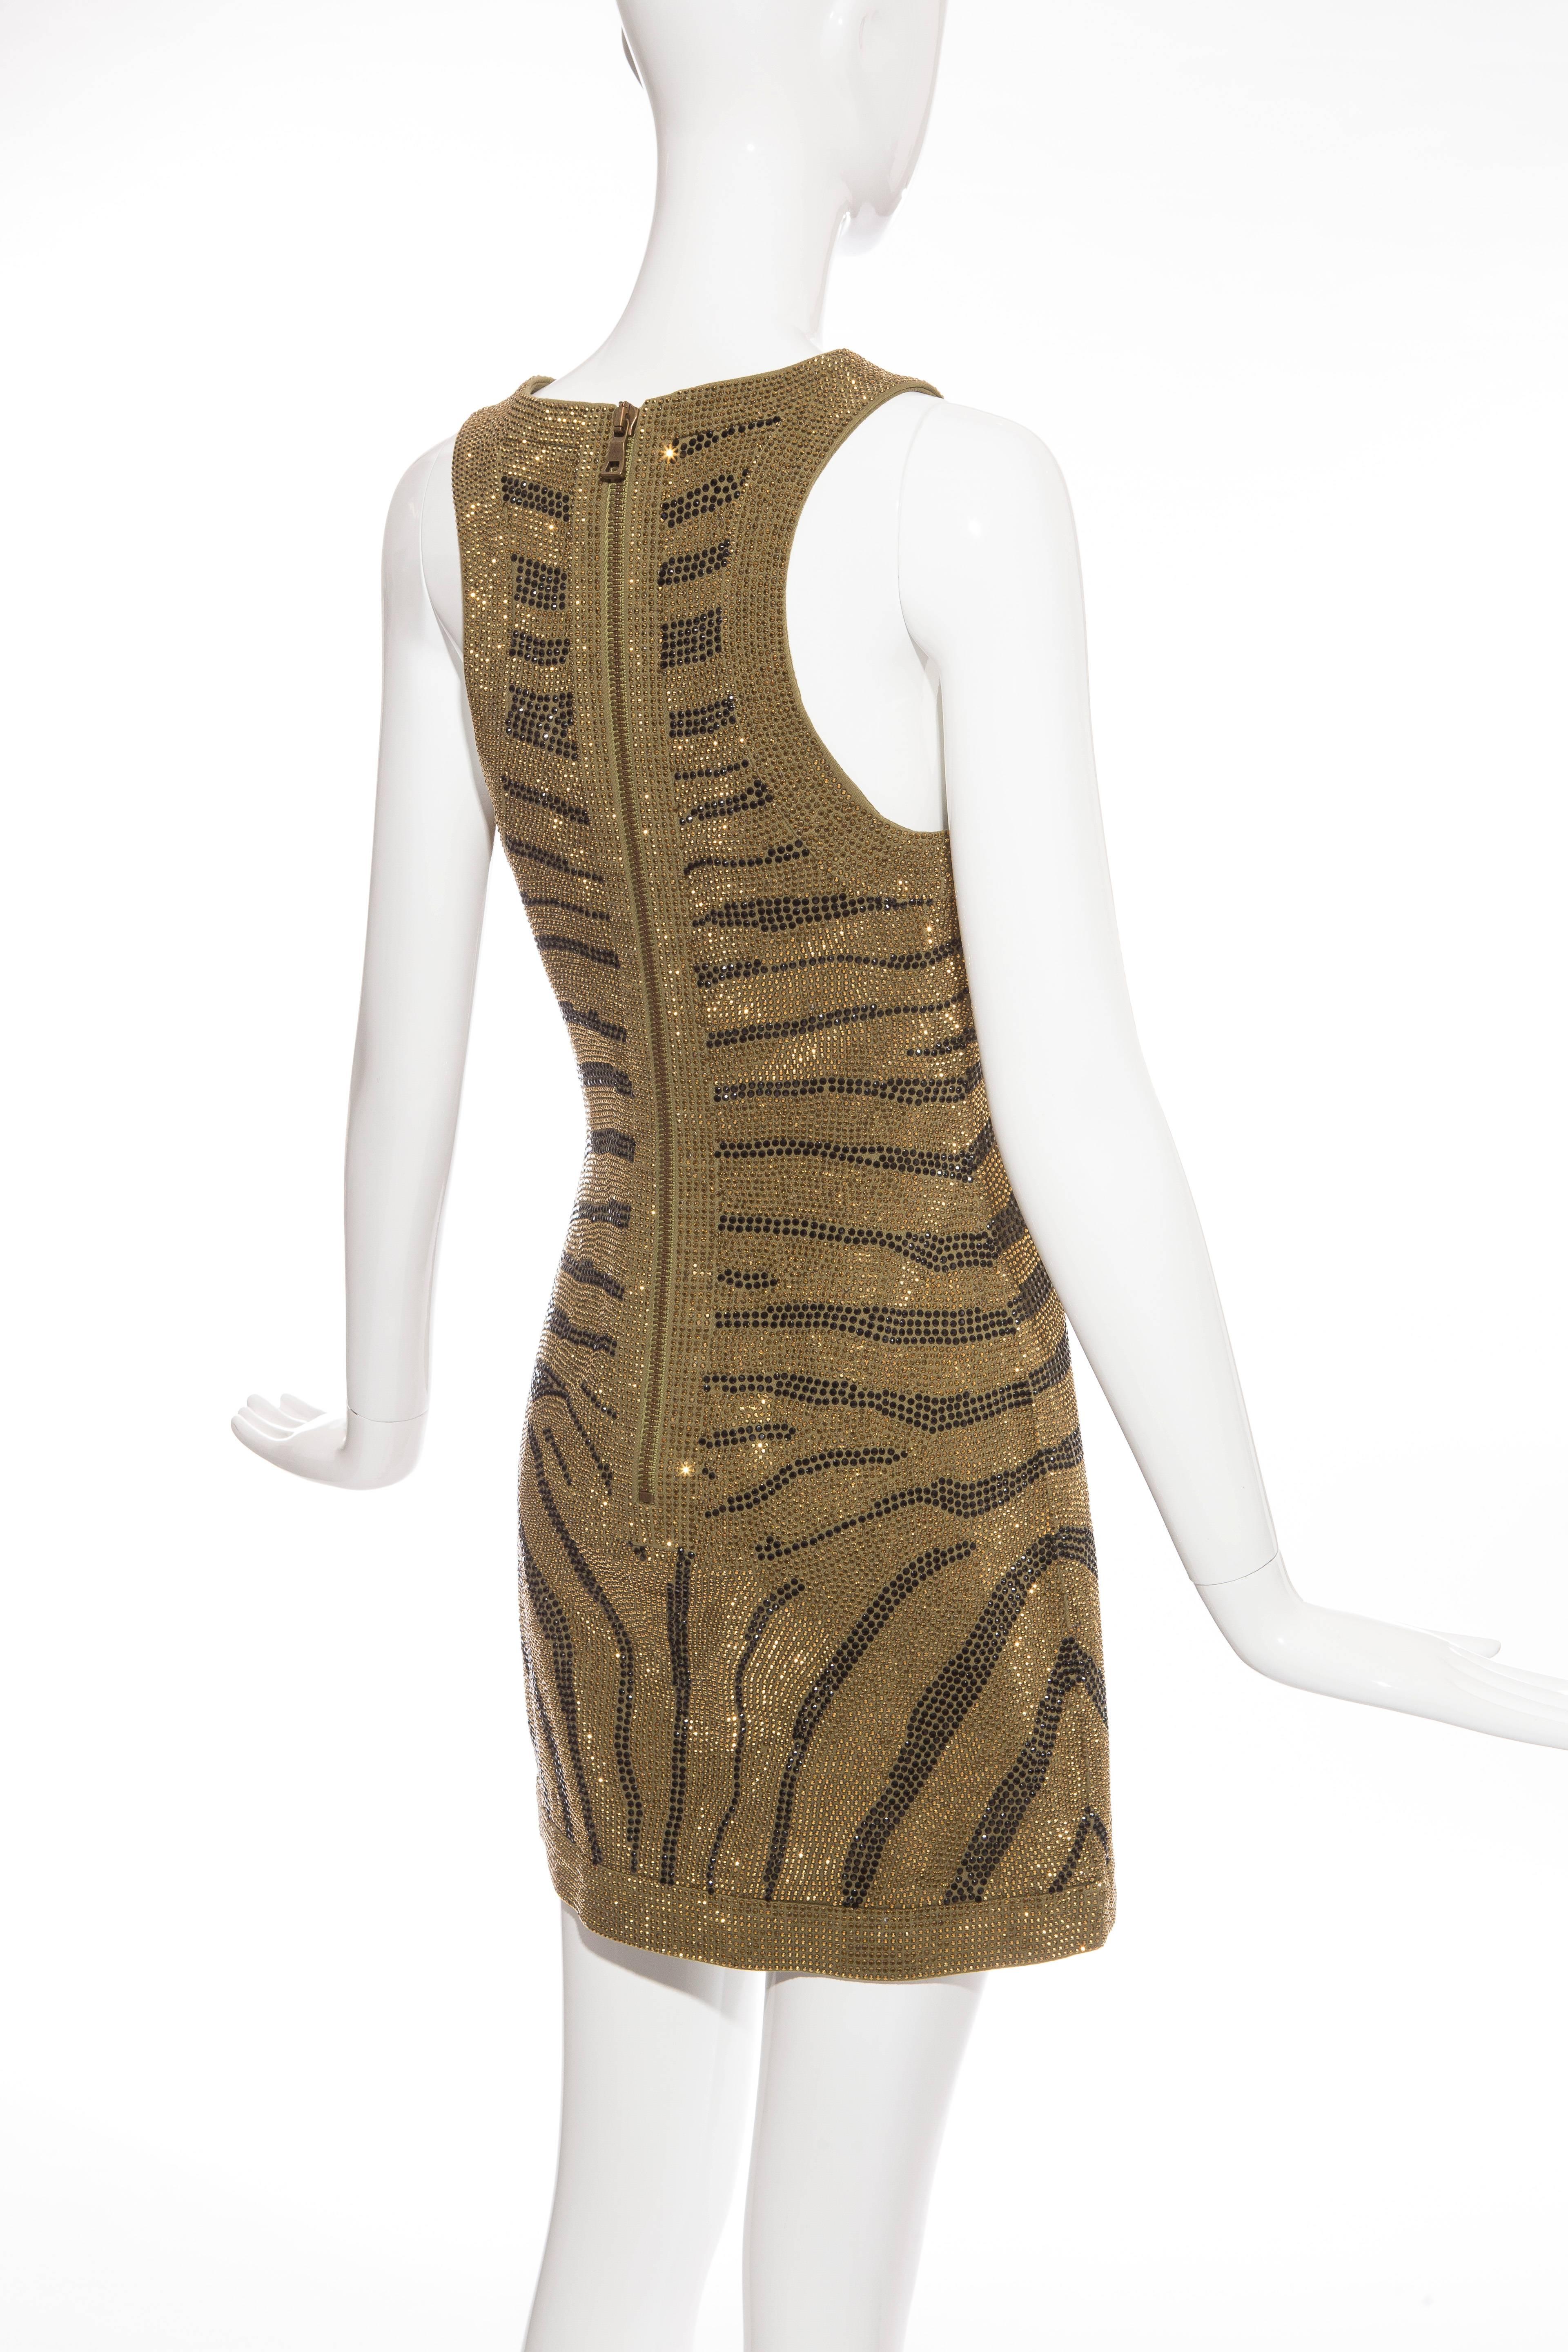 Balmain Runway Gold Zebra Print Crystal Embellished Evening Dress, Pre-Fall 2014 In New Condition For Sale In Cincinnati, OH